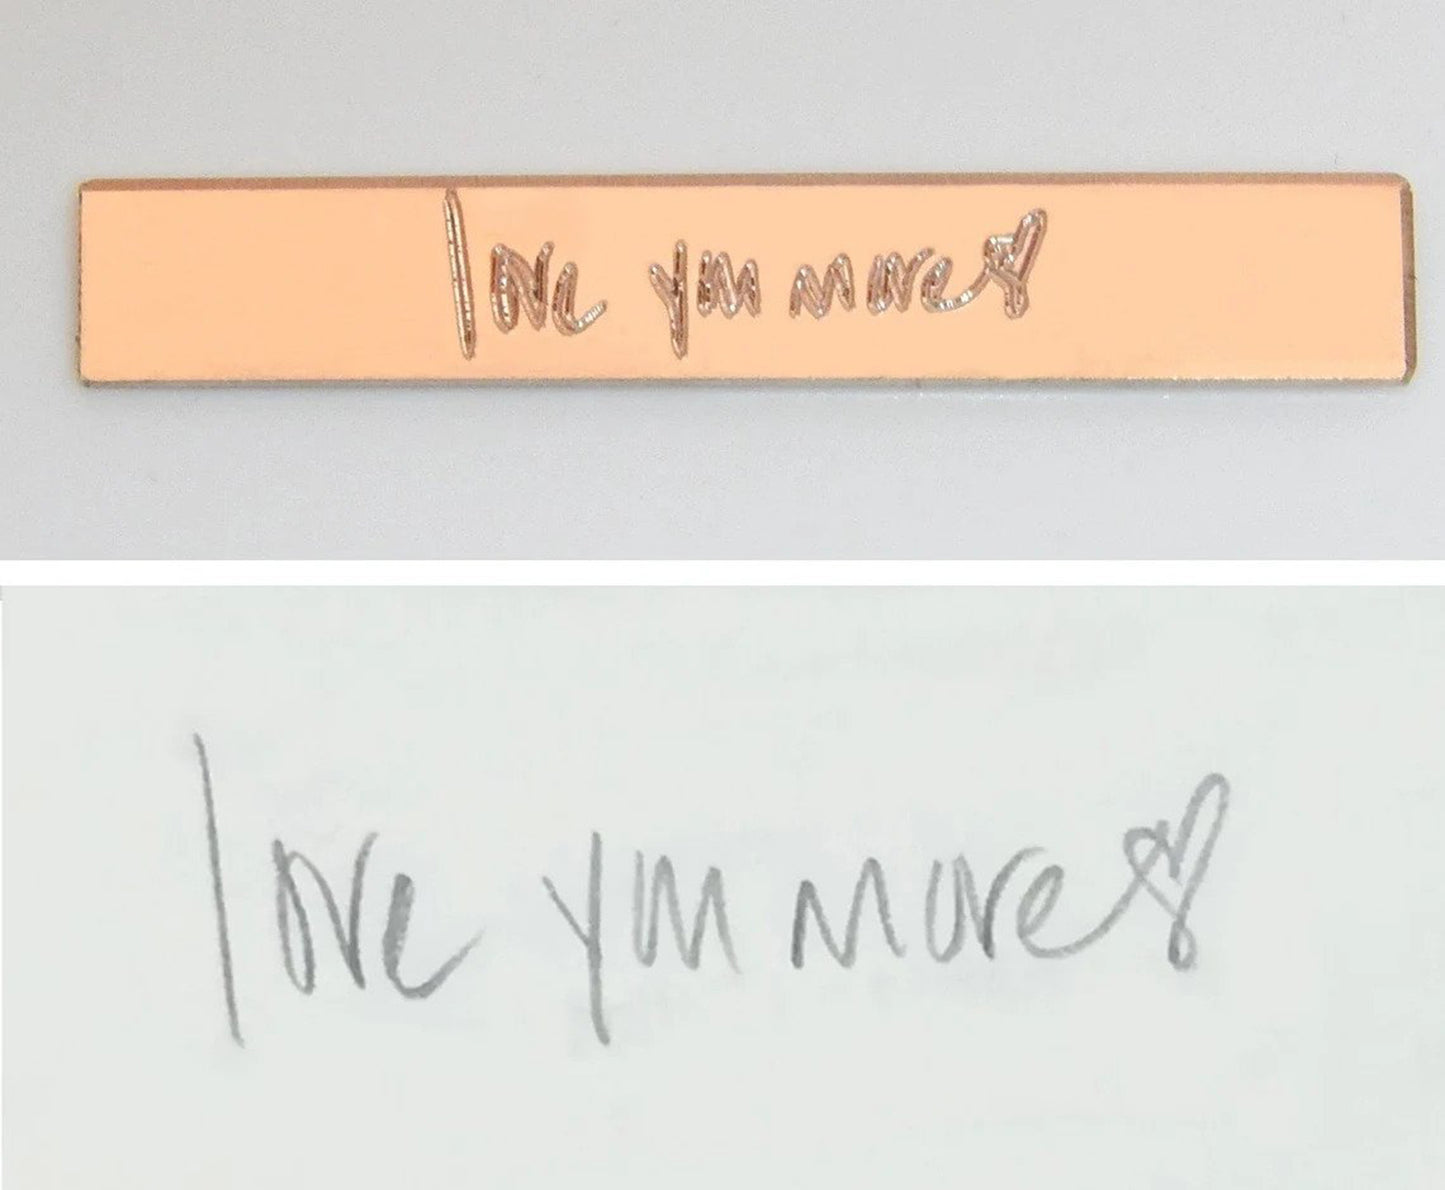 A handwritten message in distinct handwriting is shown next to a rendering of a rose gold bar that has been engraved with the same message in the same distinct handwriting.